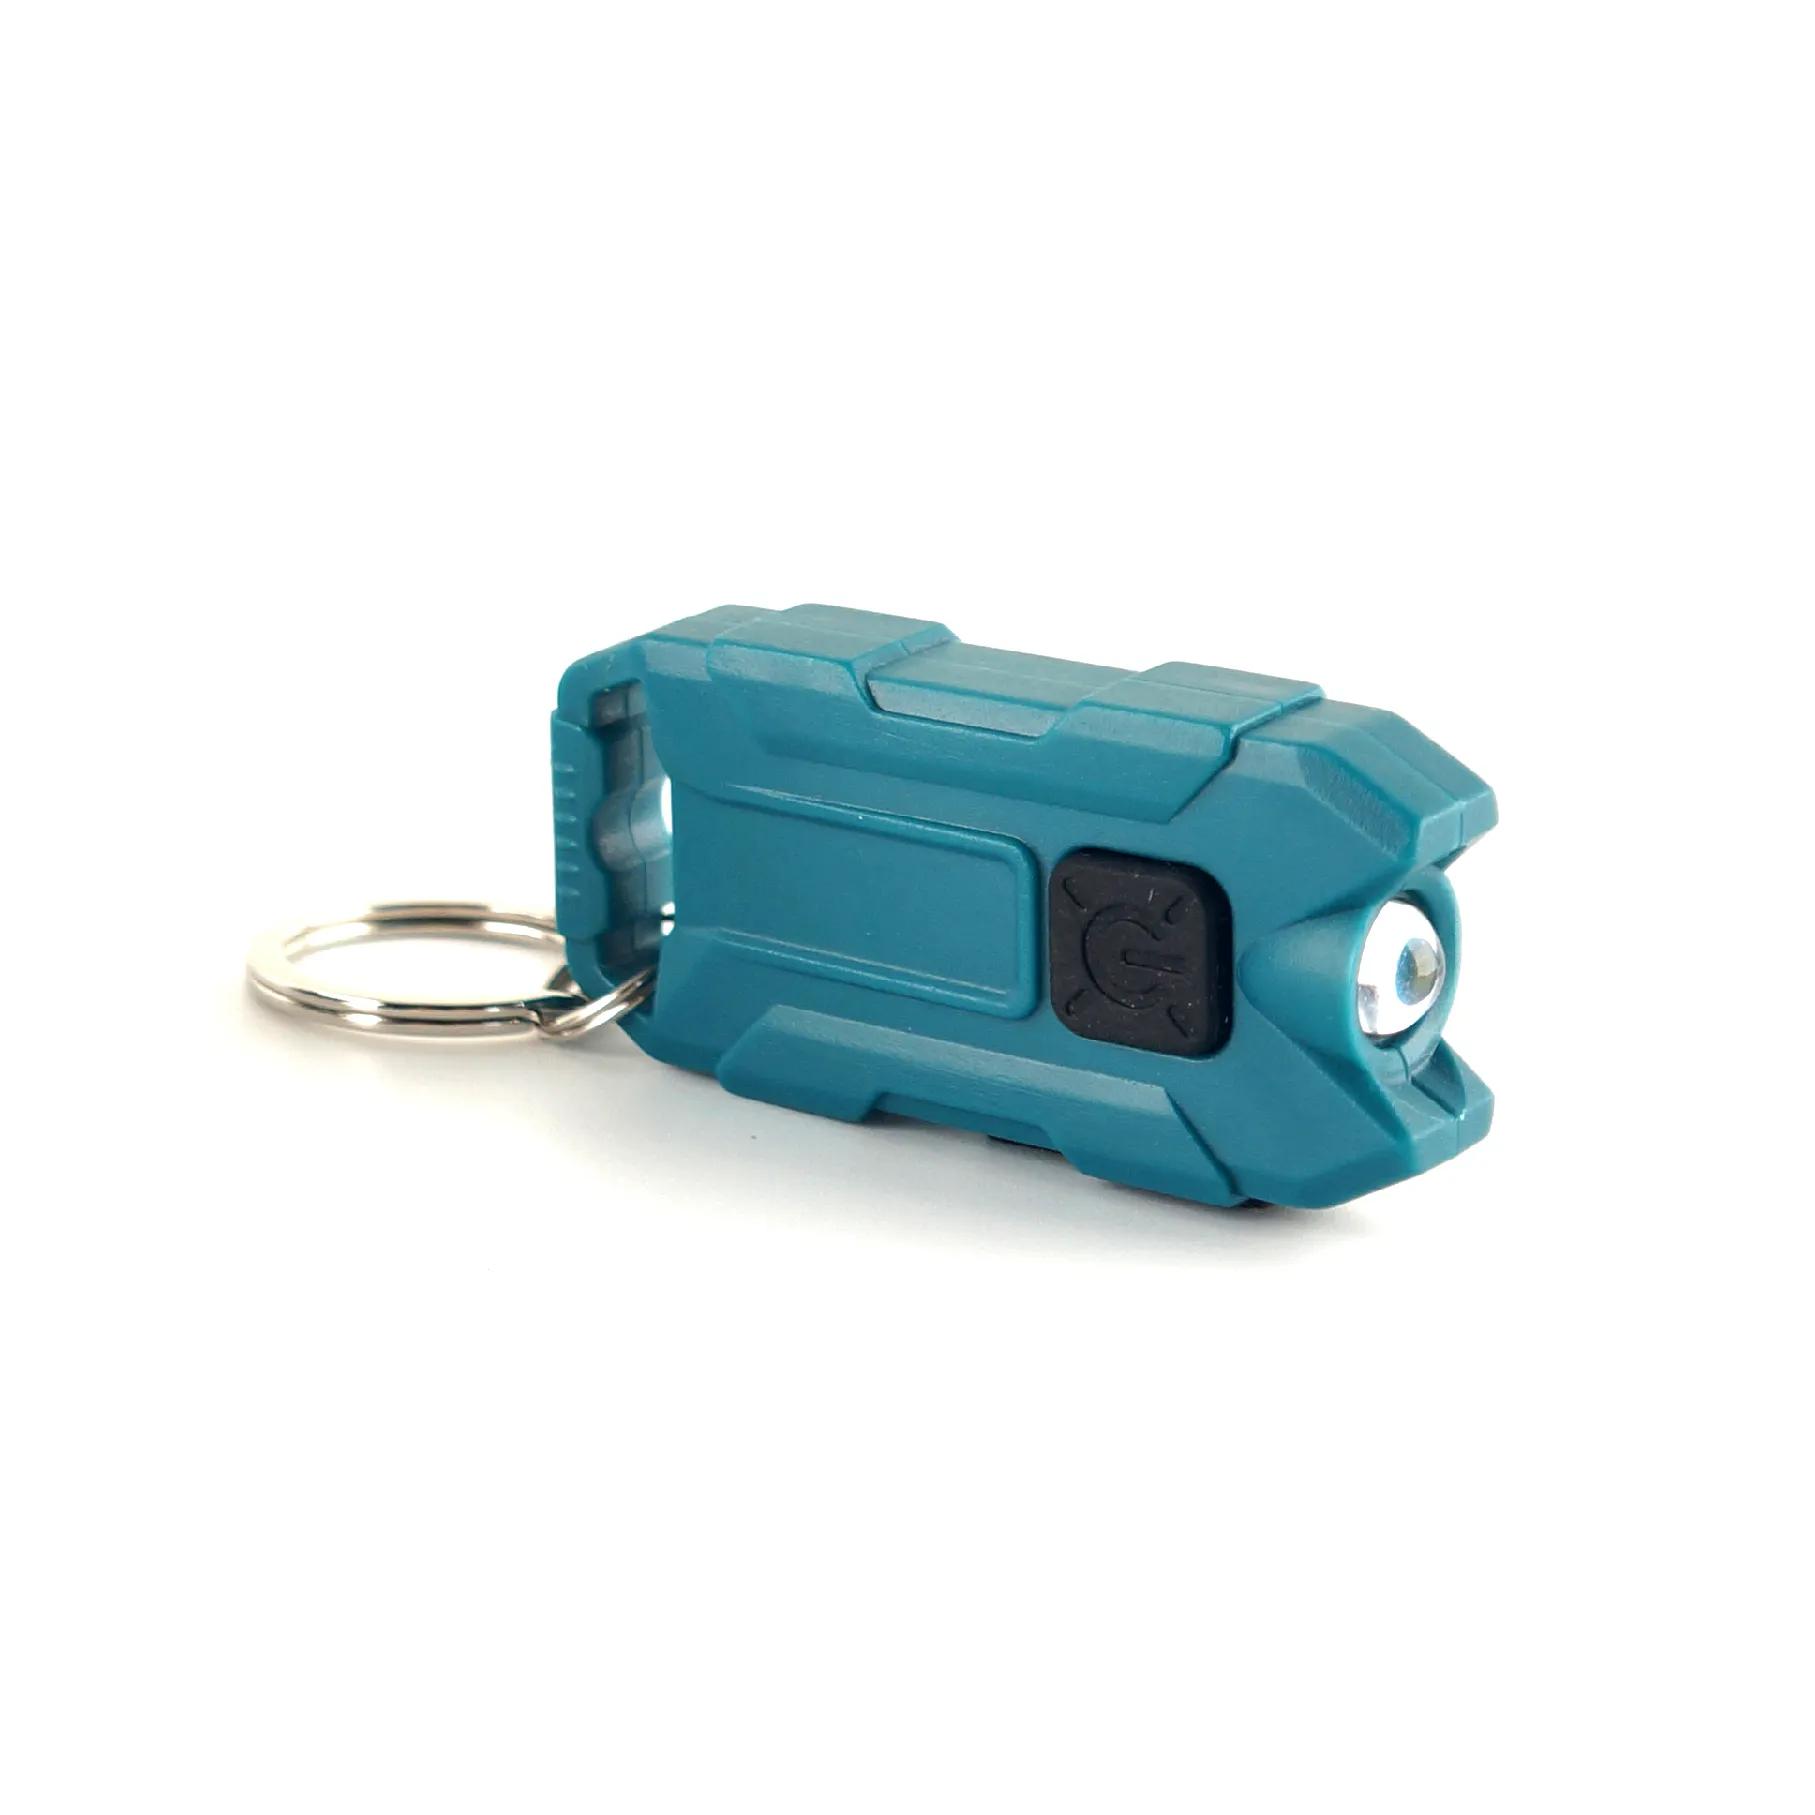 Portable Mini Keychain Light USB Rechargeable Torch Key Chain LED Light